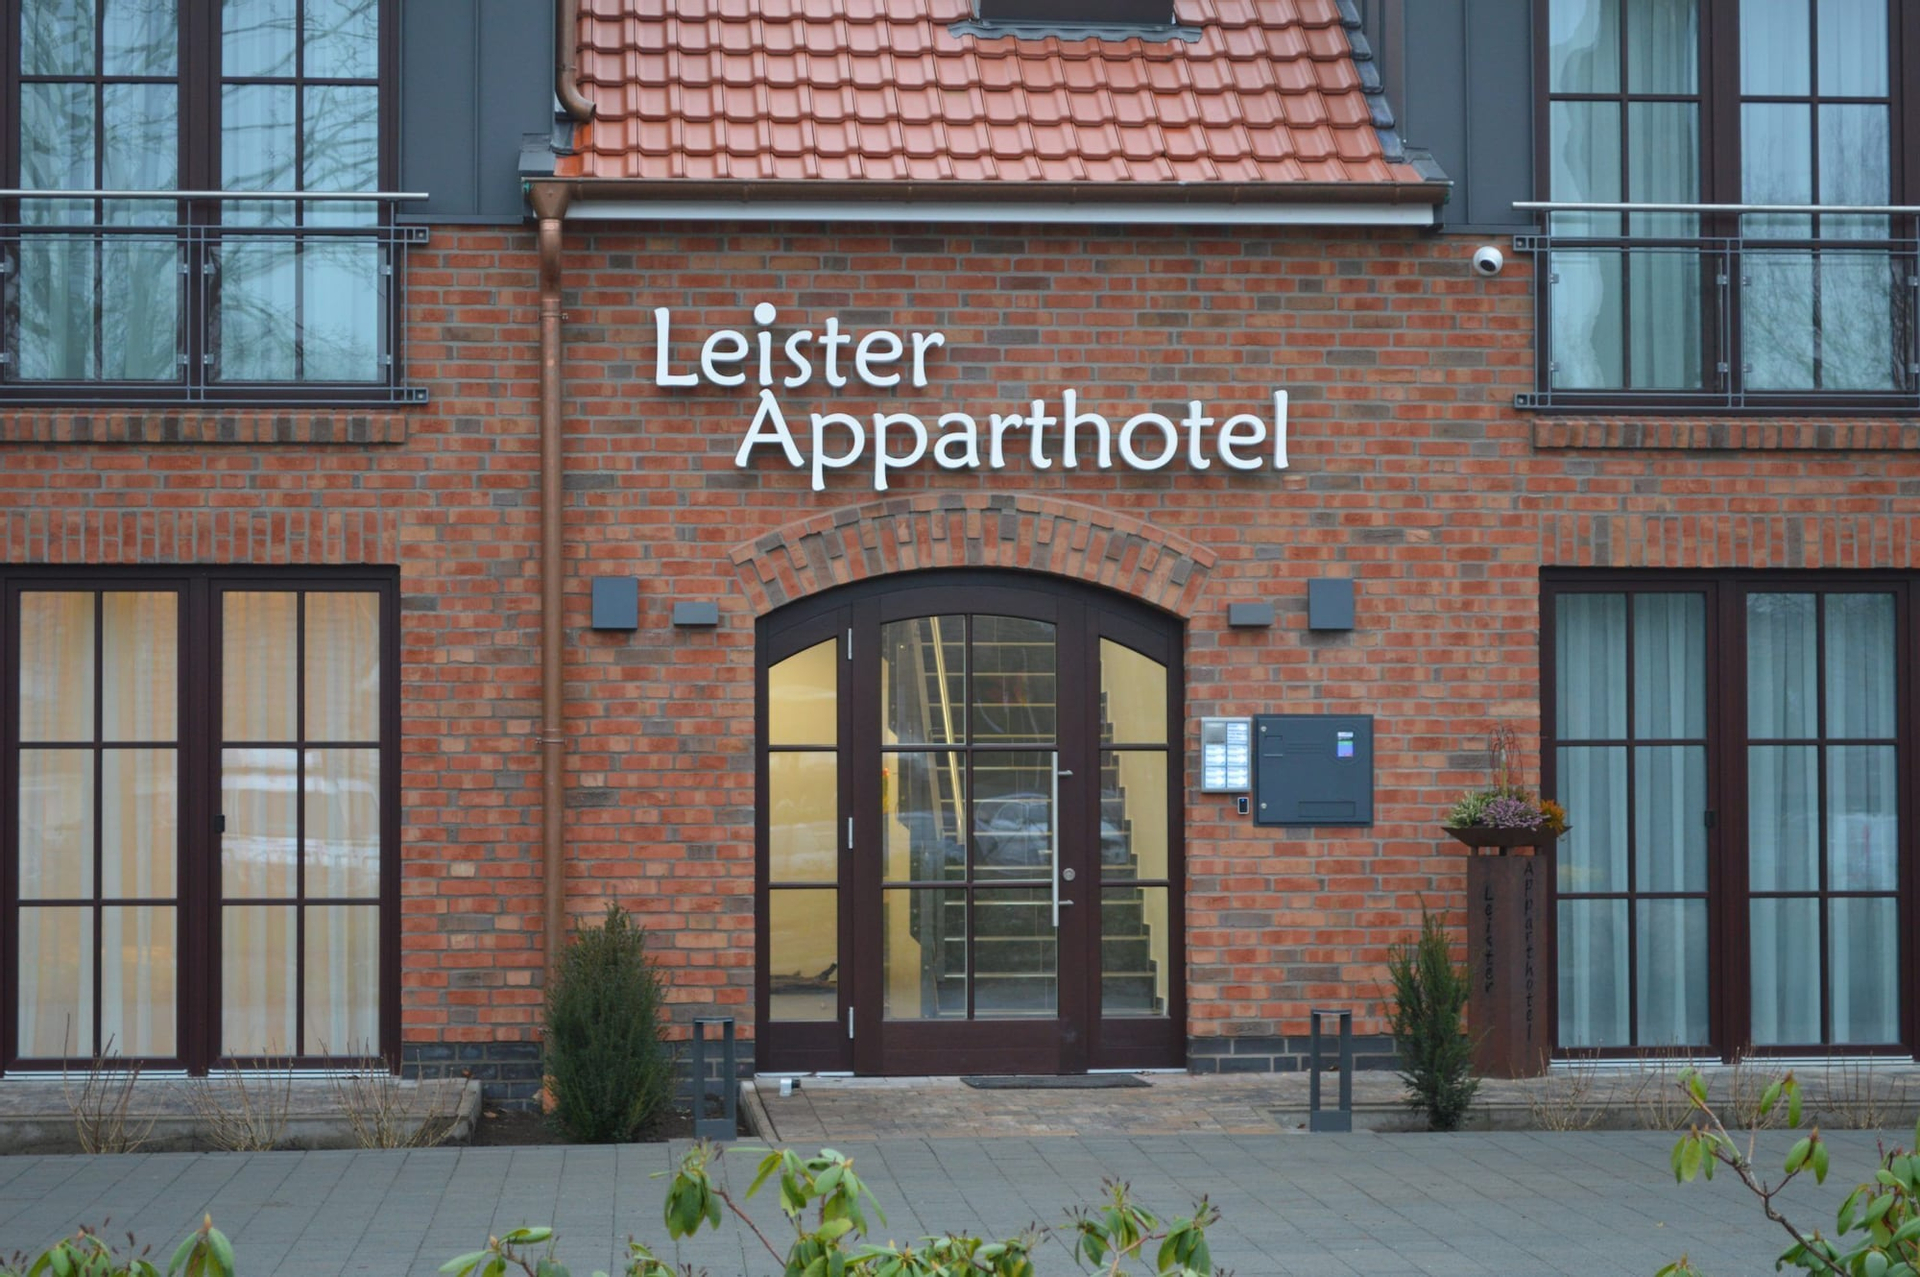 Primary image, Leister Apparthotel, Diepholz